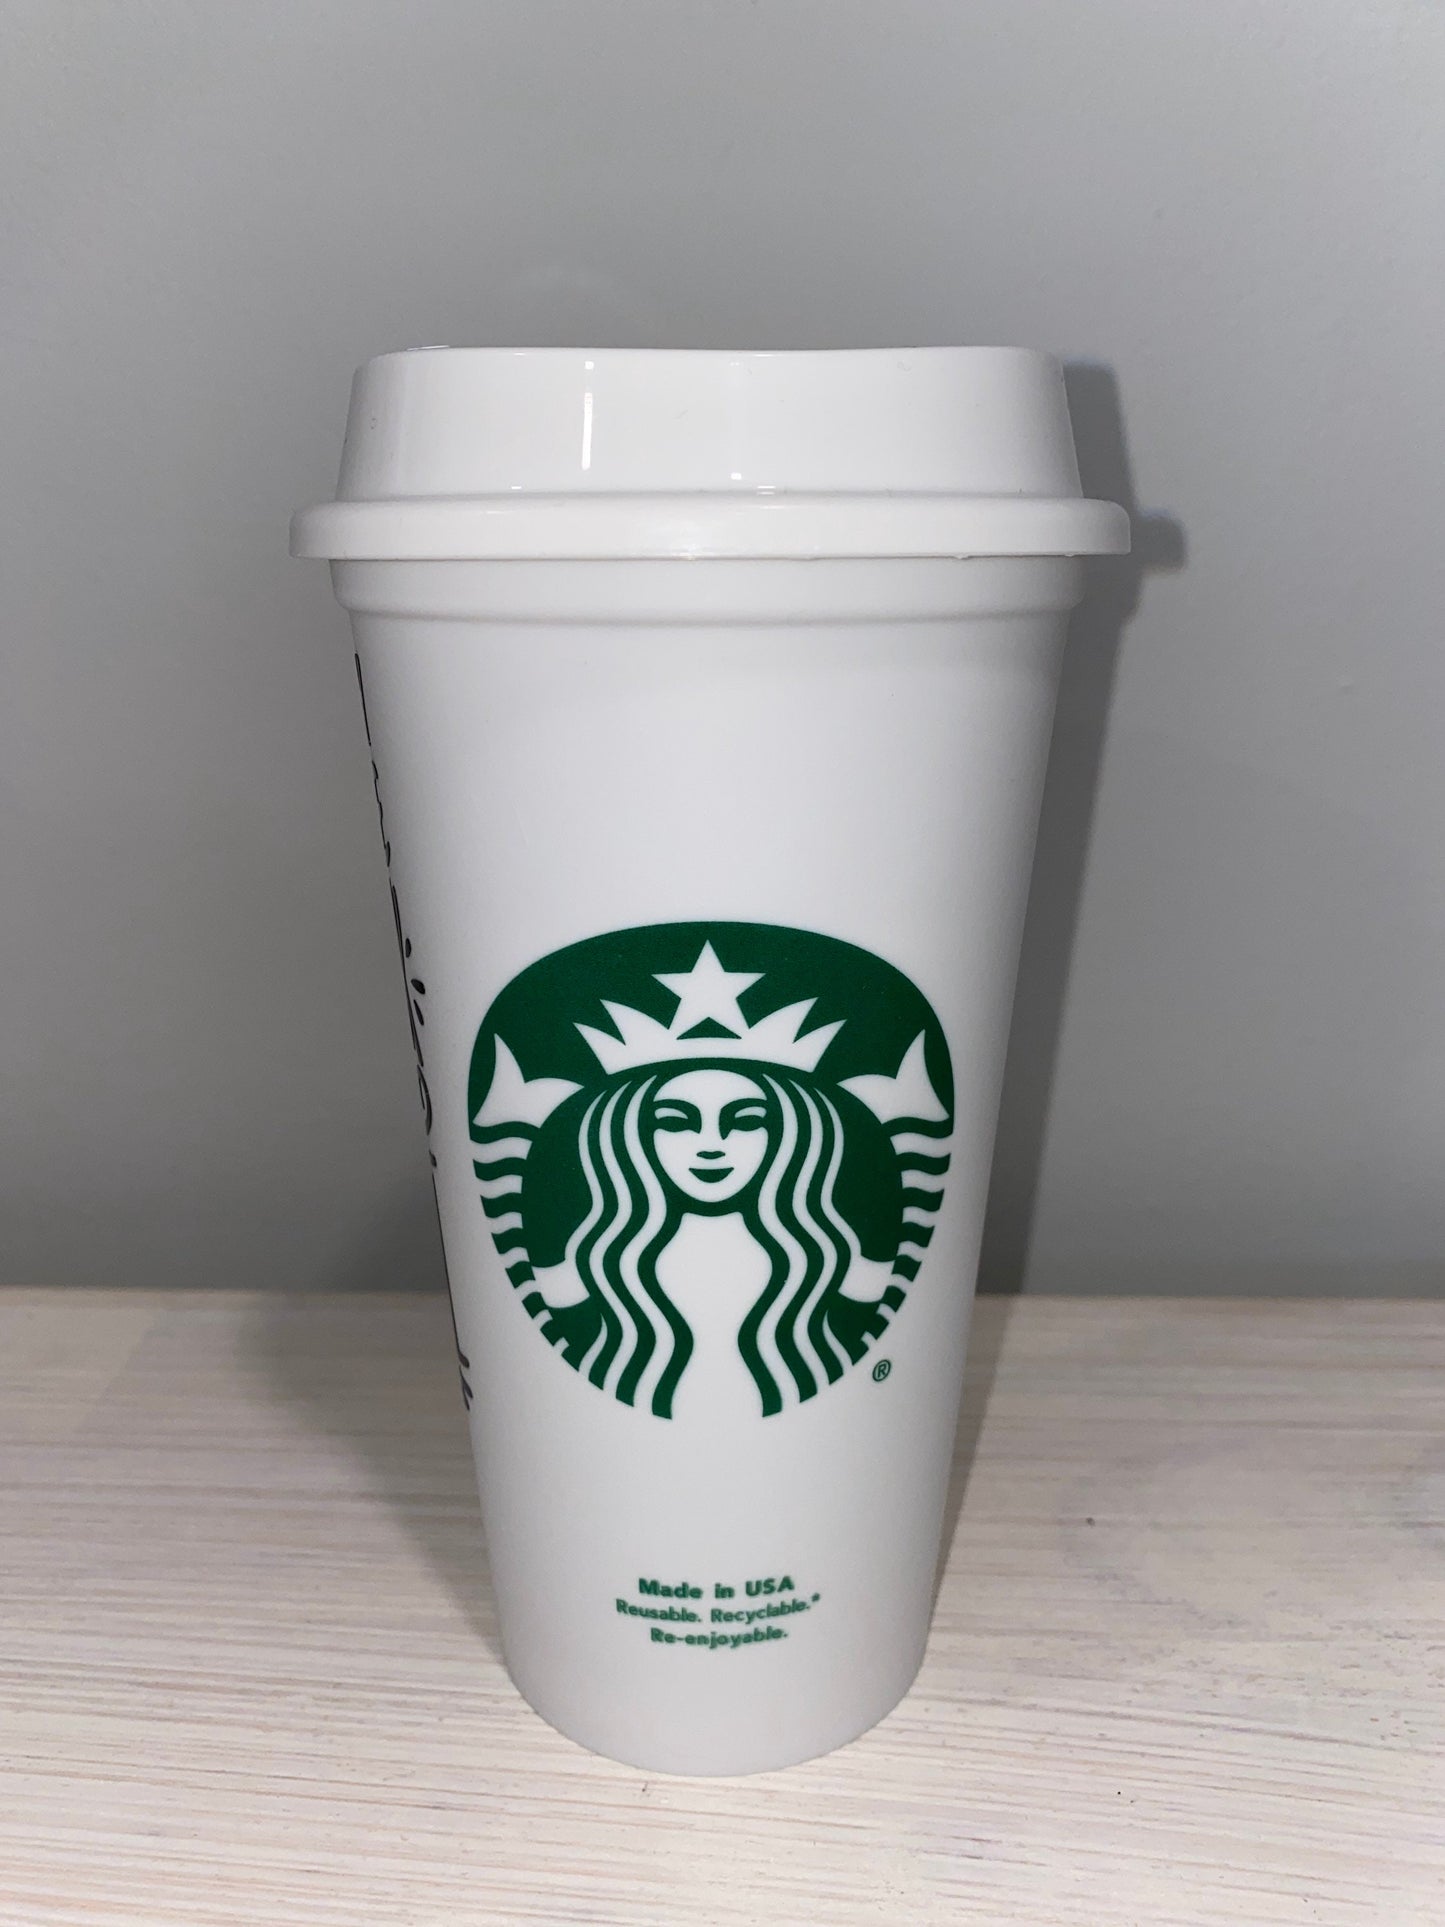 Flannel Starbucks Hot Cup | Fall 2020 Starbucks Cup | Gift for Coffee Lover | Gift for her | Personalized Starbucks Cup